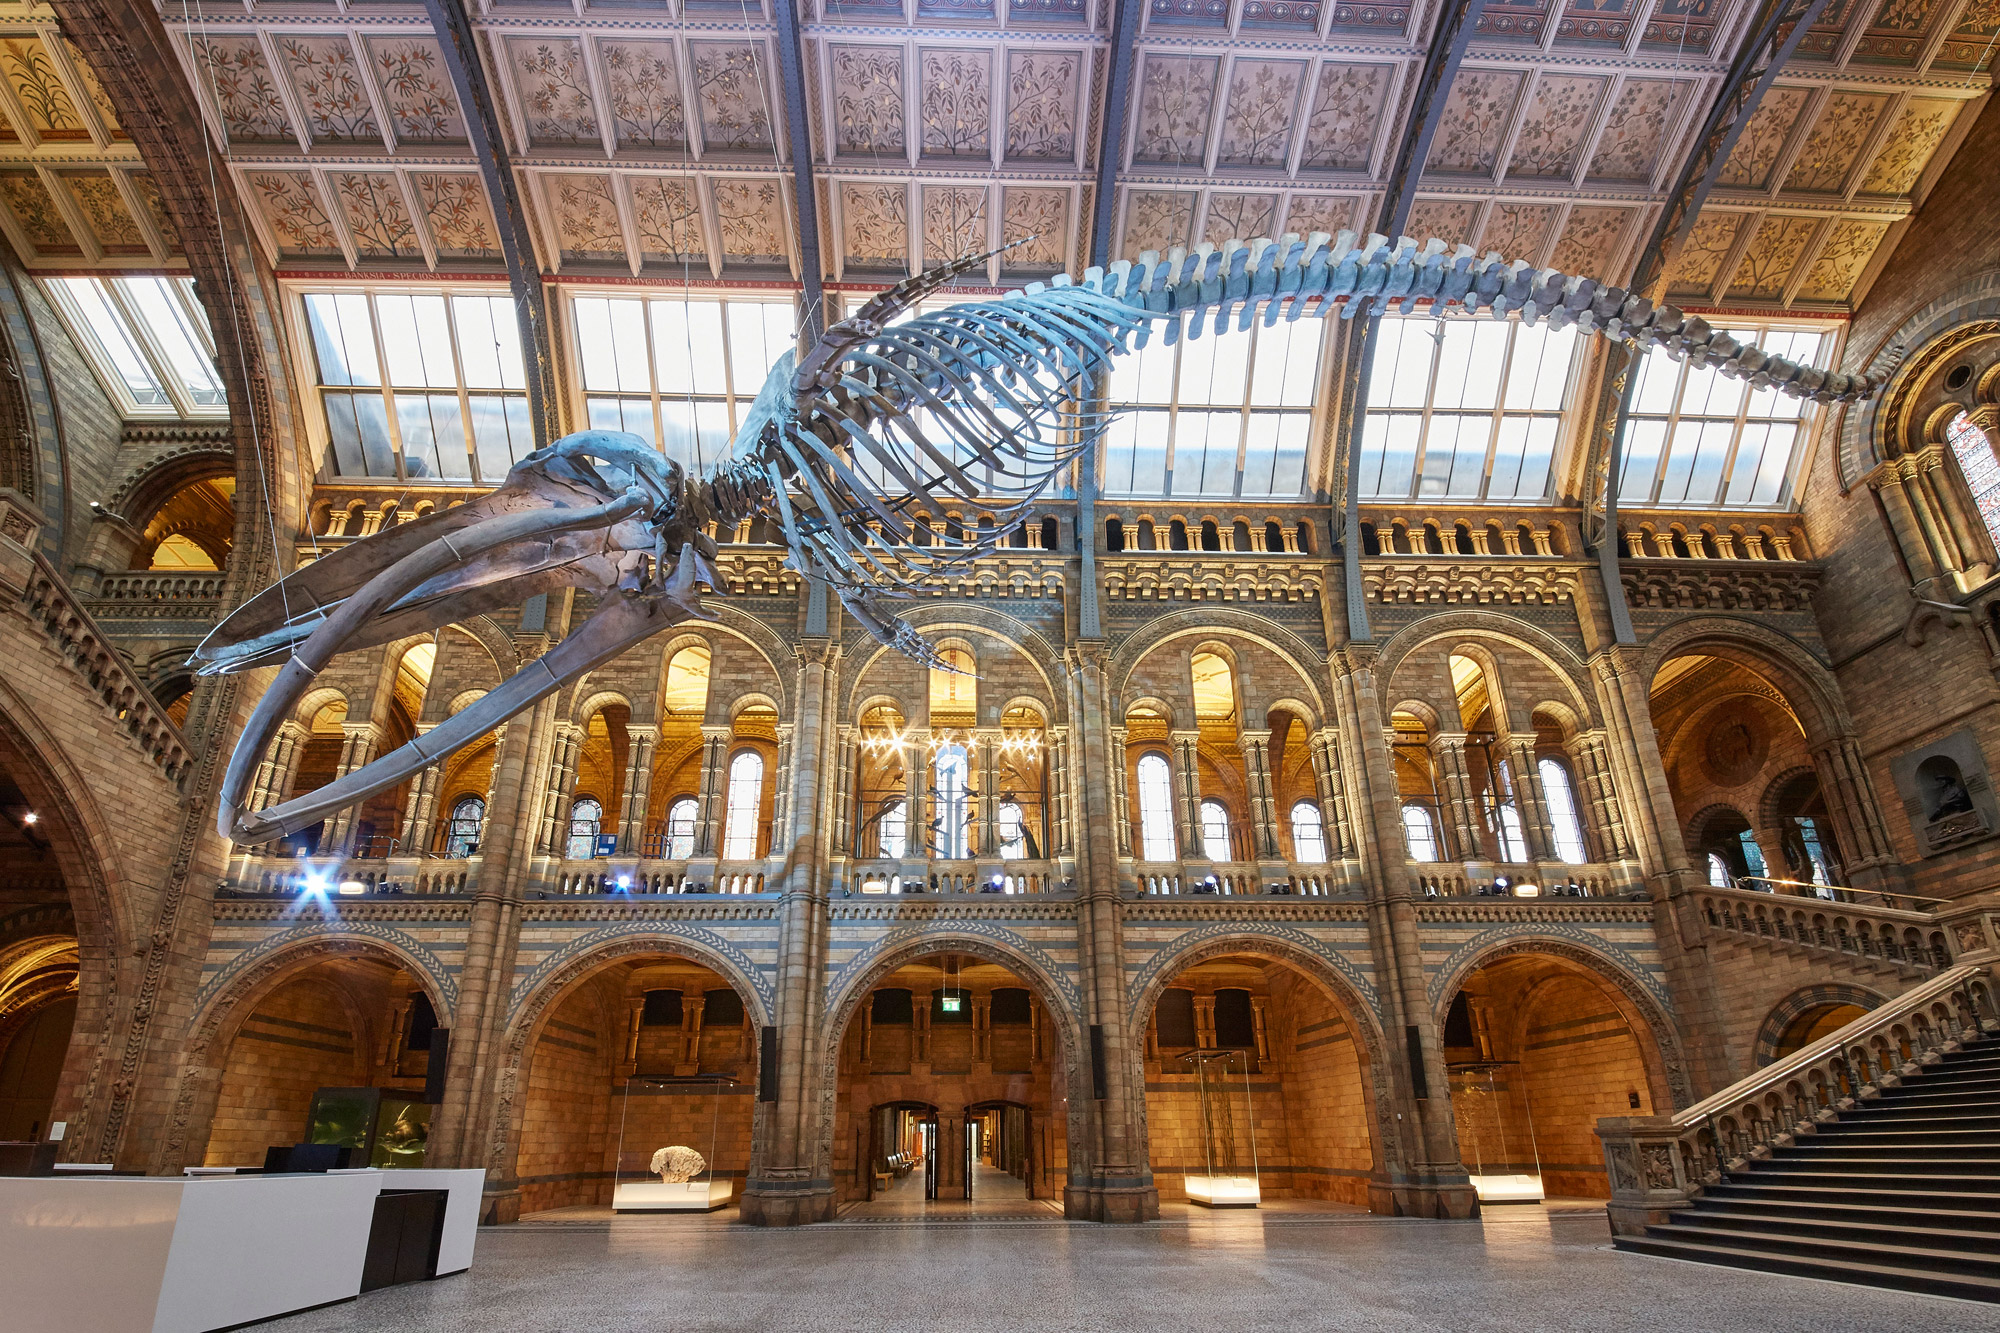 Natural History museum, things to see in 48 hours in West London 